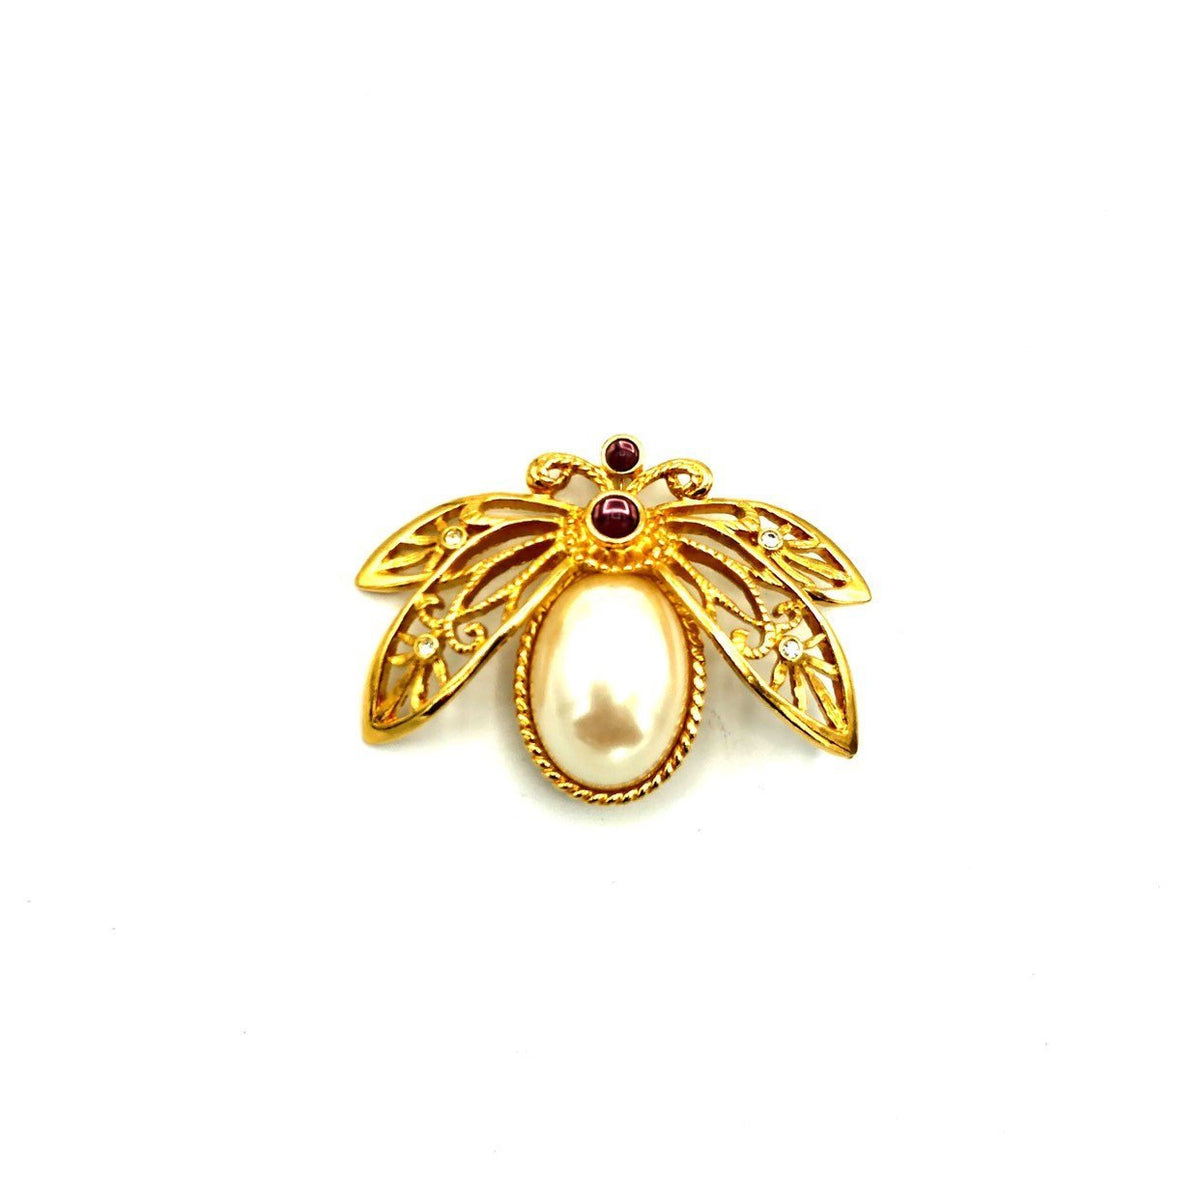 Avon Gold Large Pearl Bee Brooch - 24 Wishes Vintage Jewelry